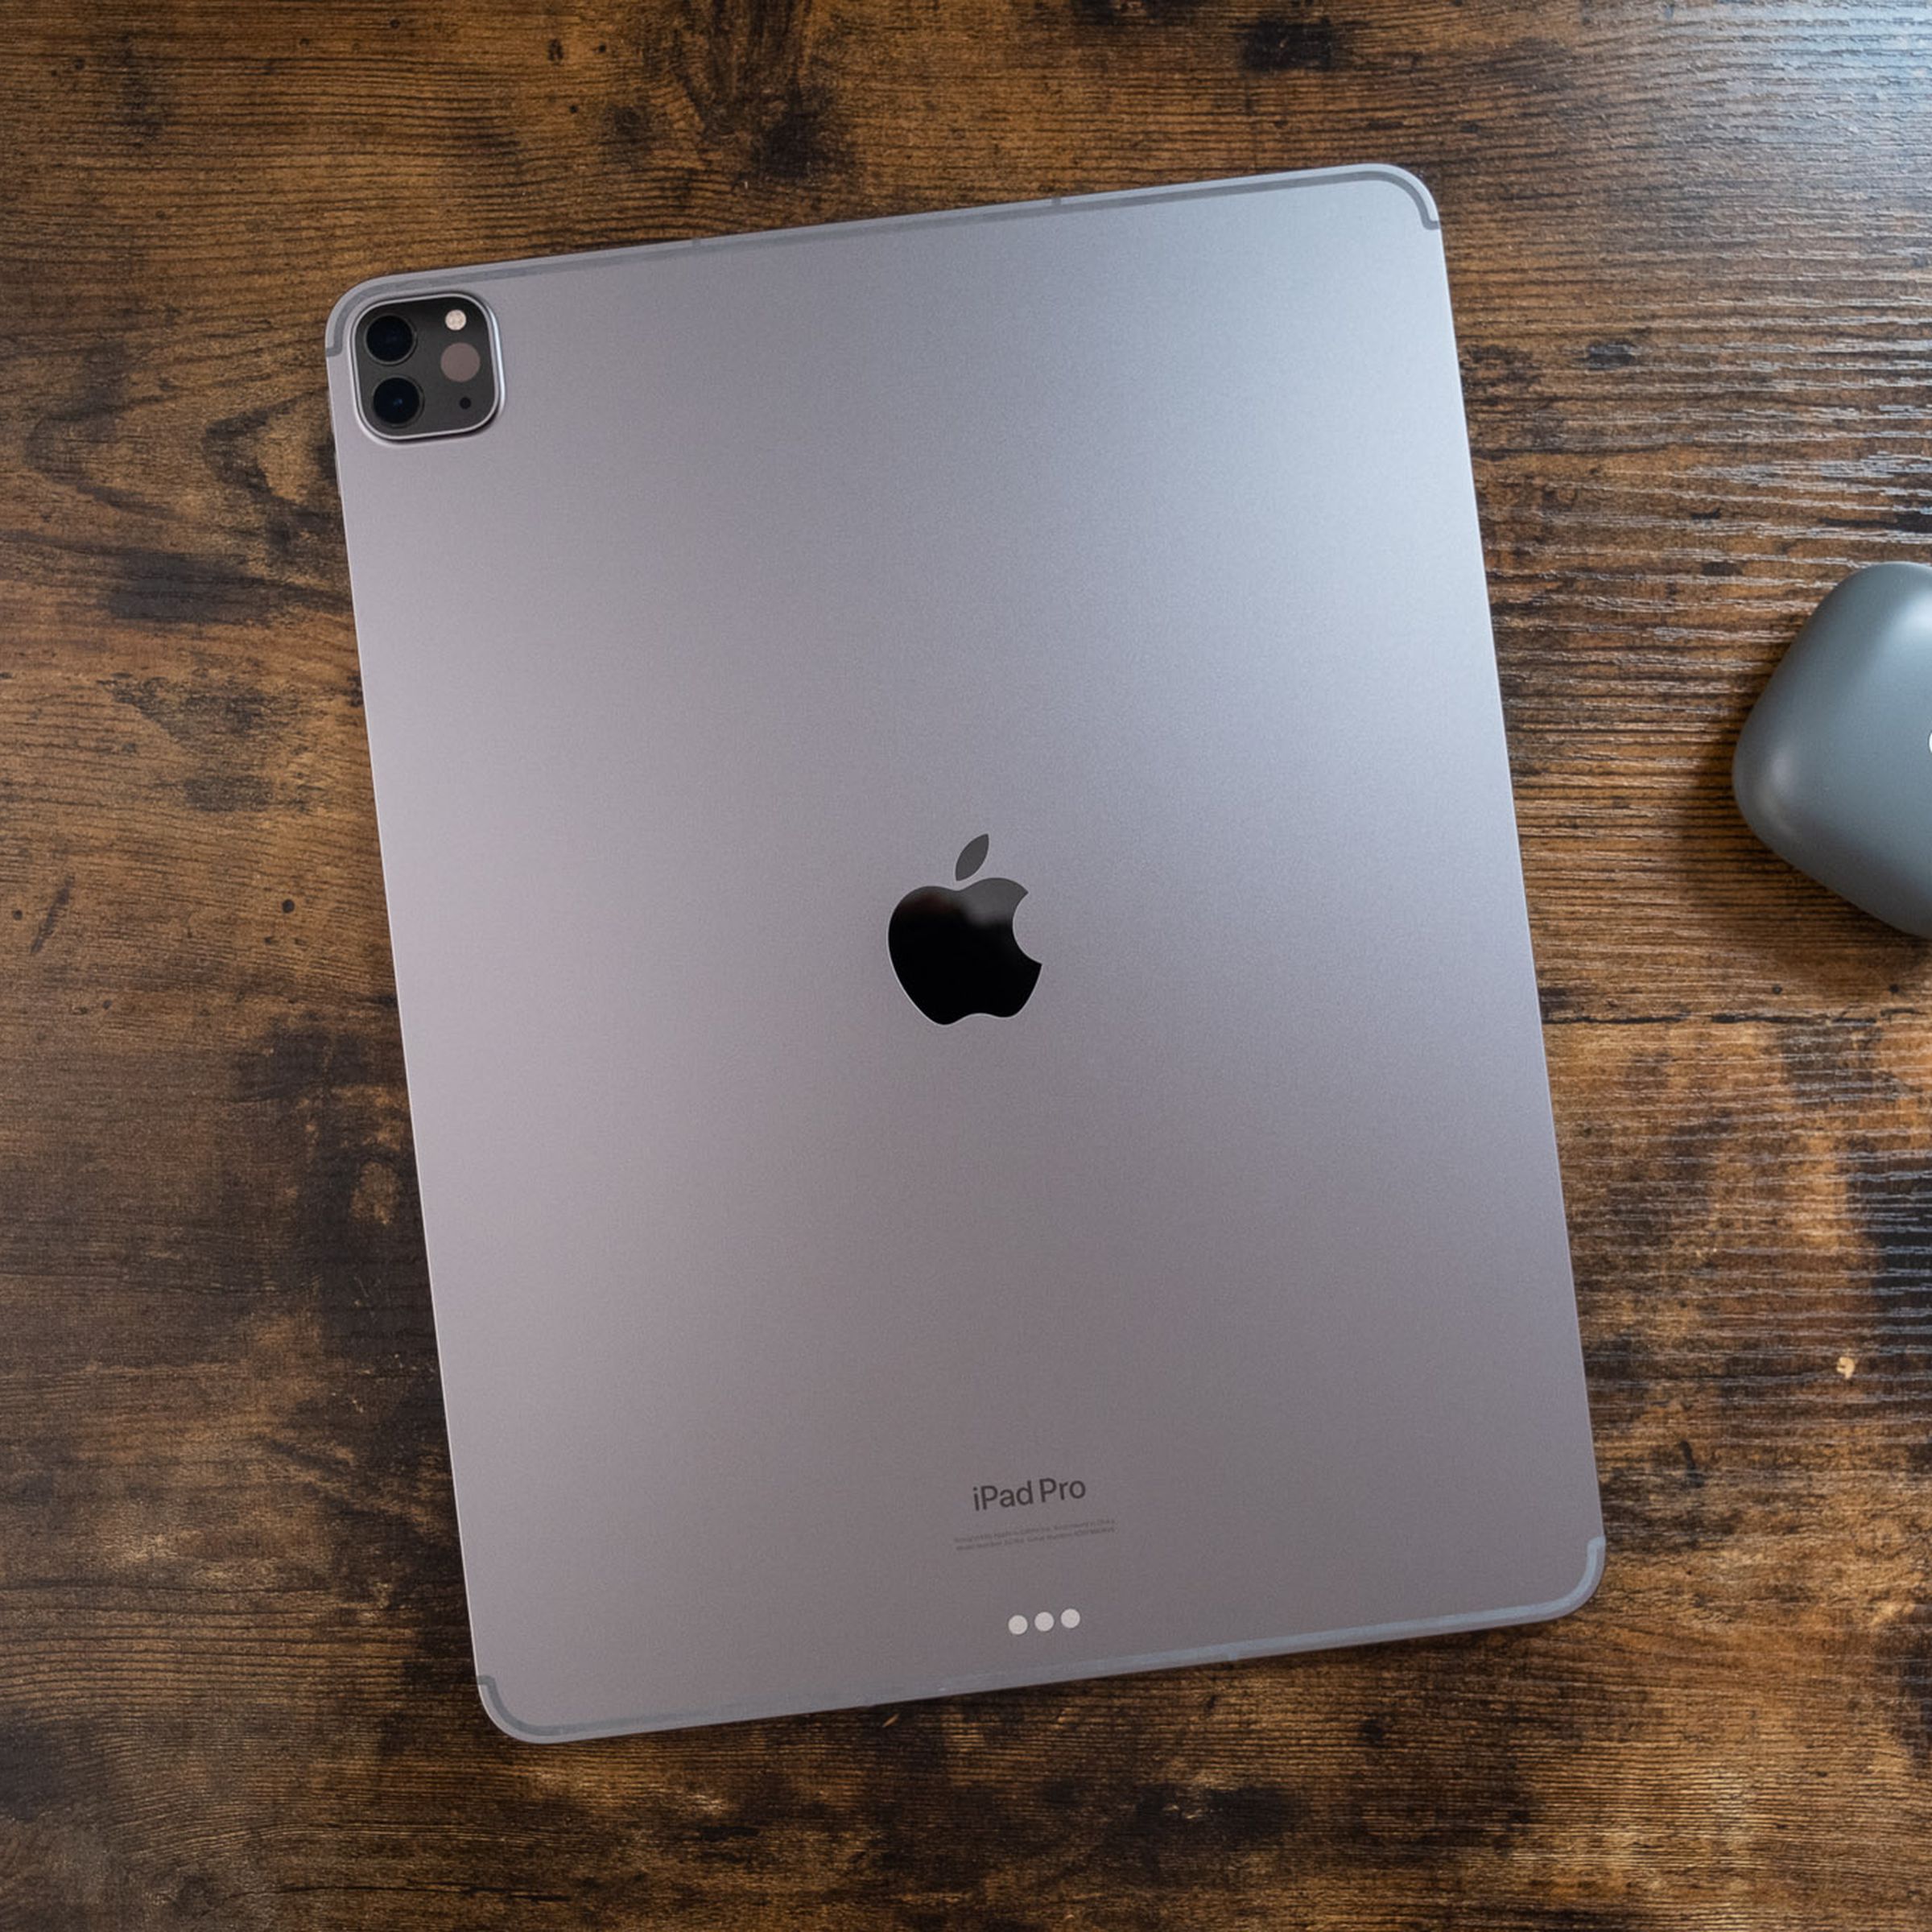 A 12.9-inch space gray iPad Pro placed face down on a wooden table, viewed from top down.